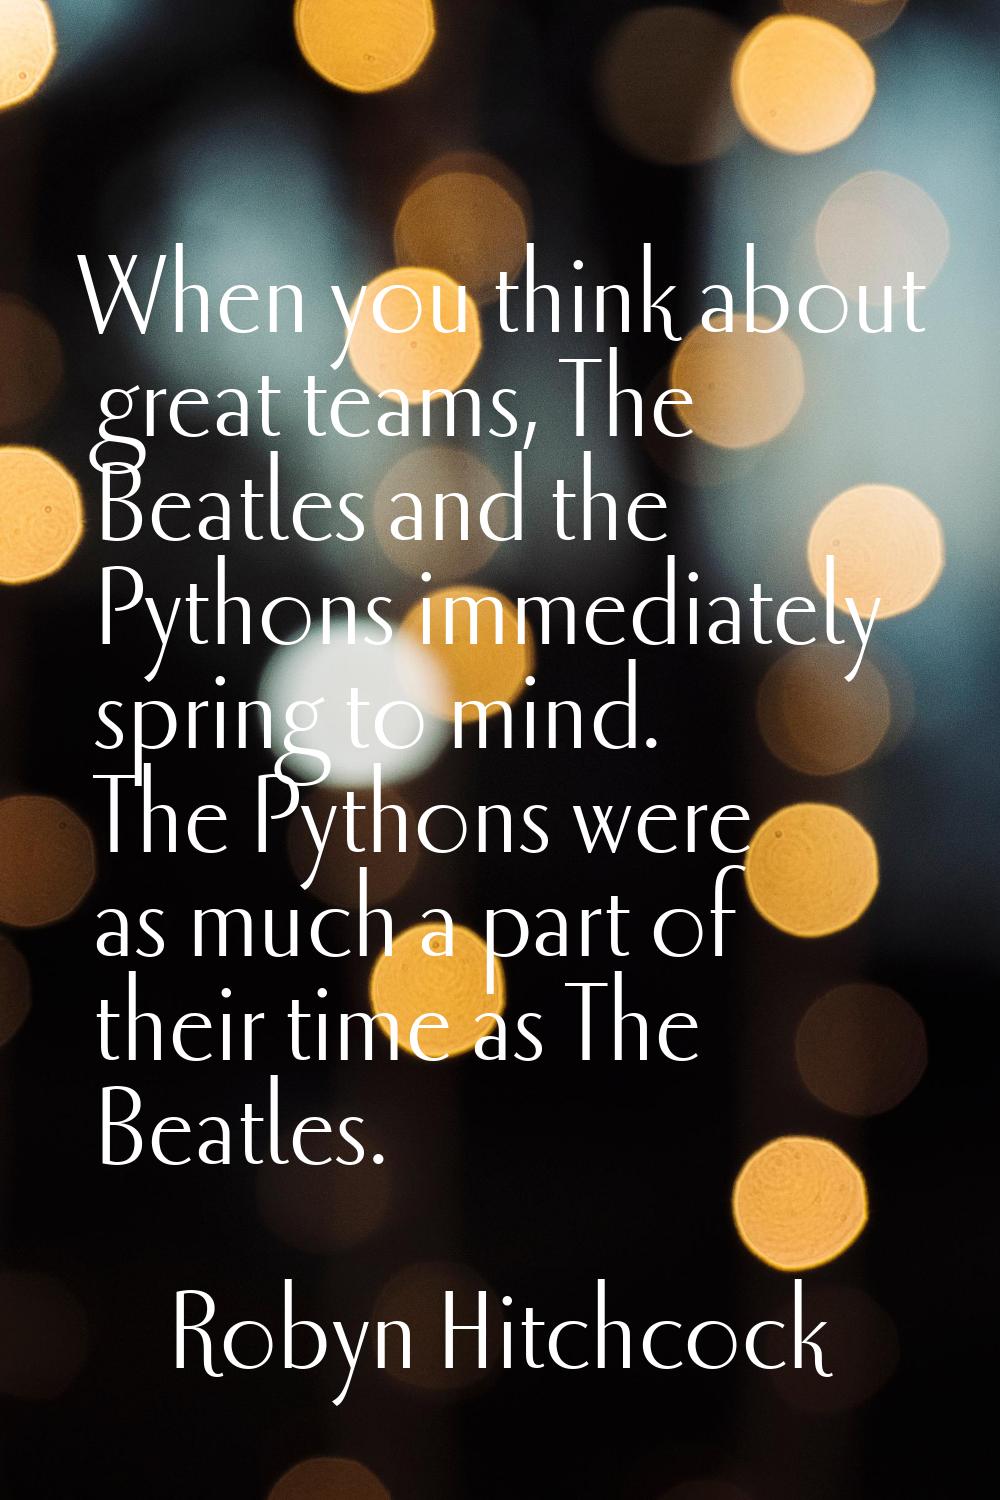 When you think about great teams, The Beatles and the Pythons immediately spring to mind. The Pytho